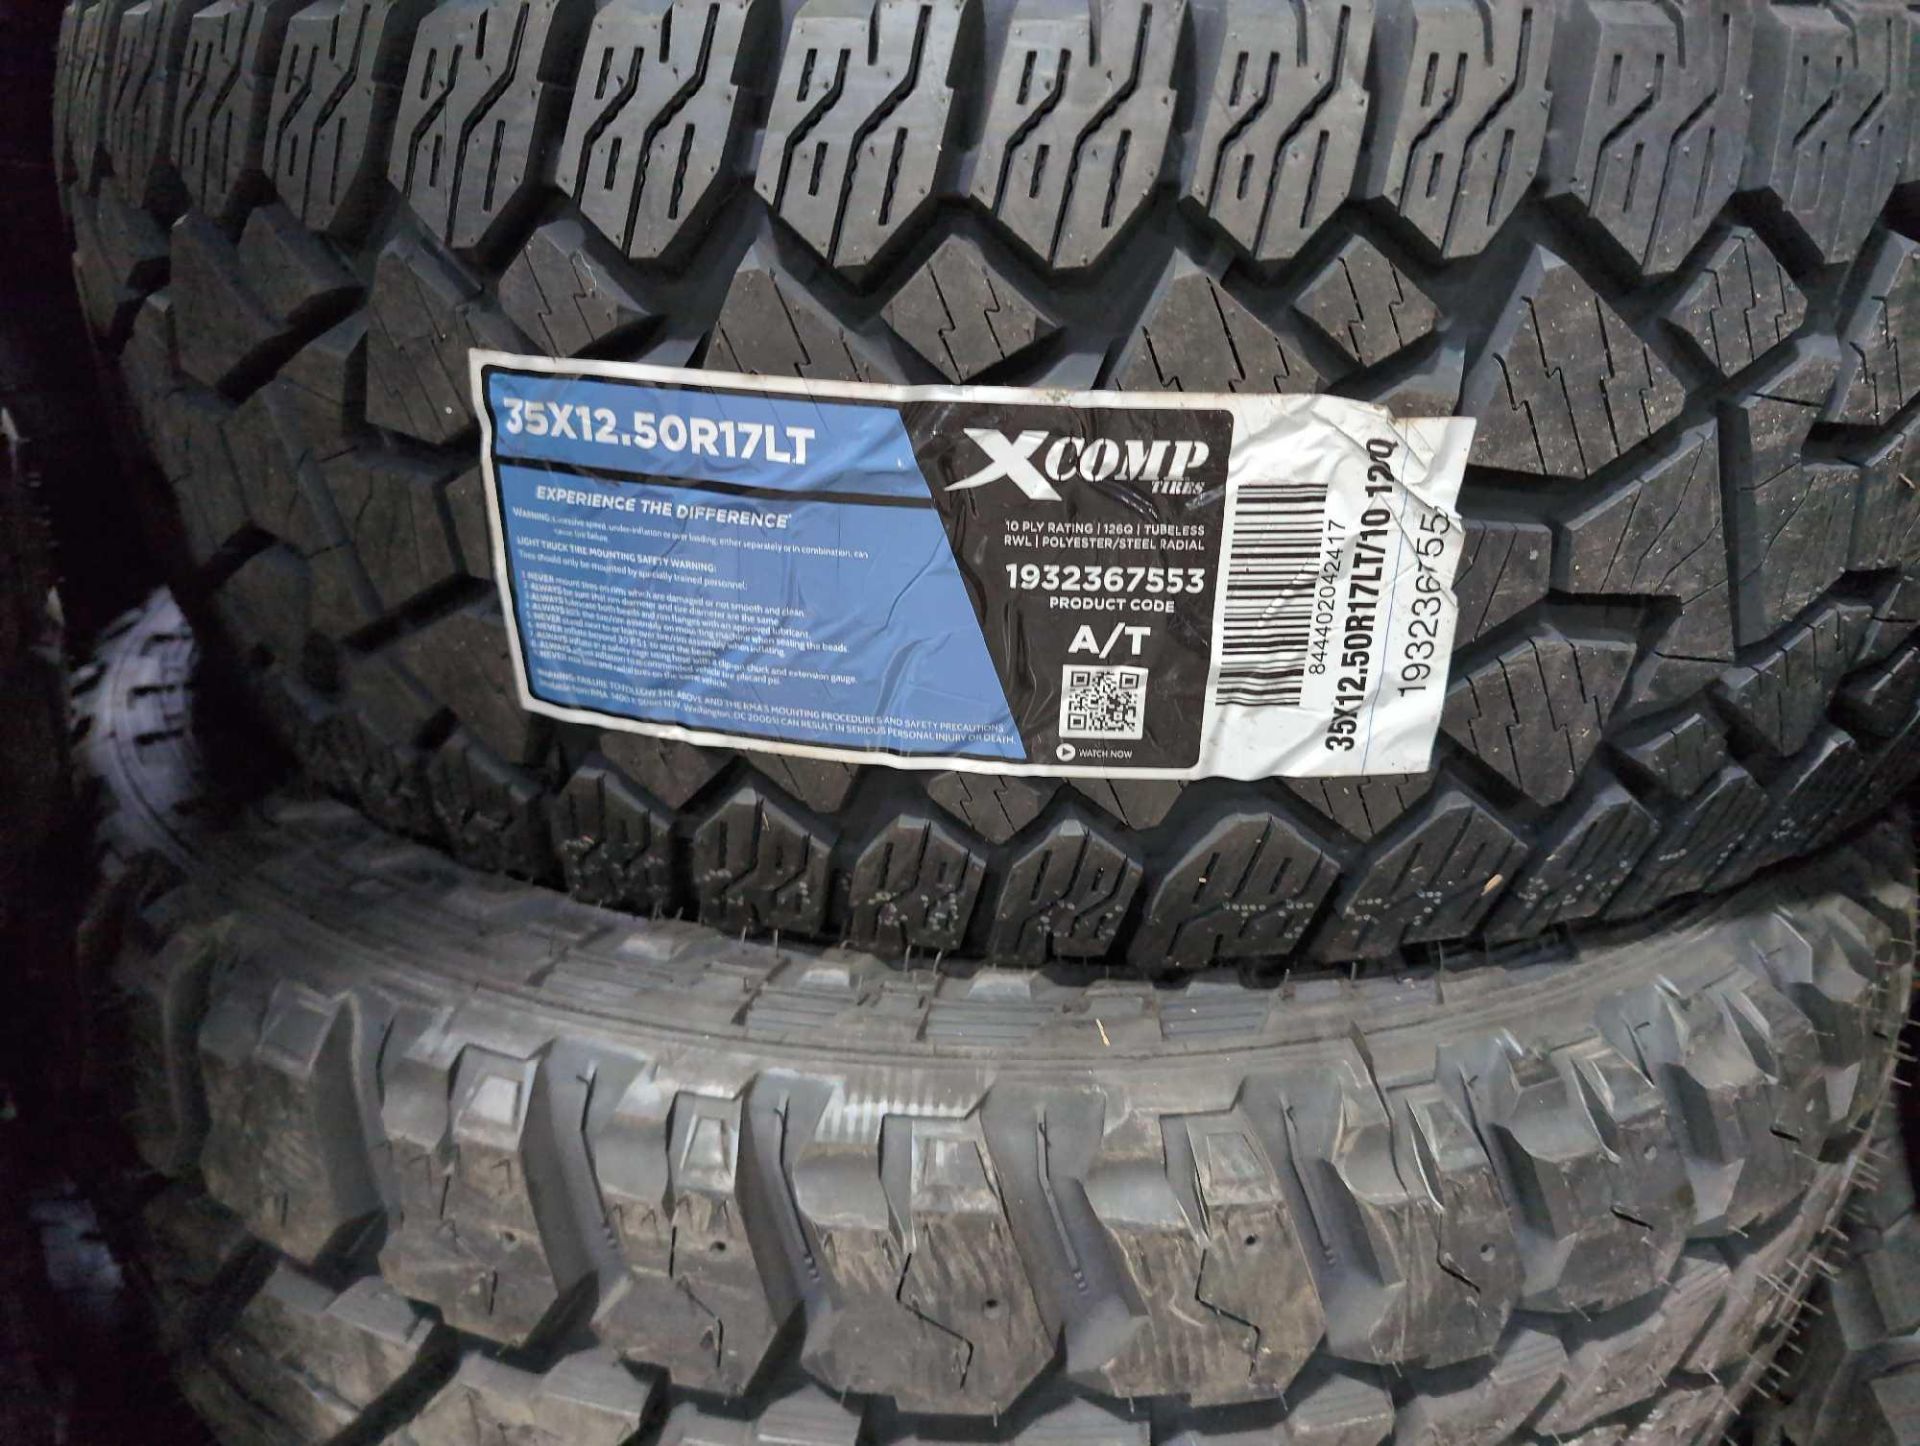 Approx 300 Tires - Image 14 of 48